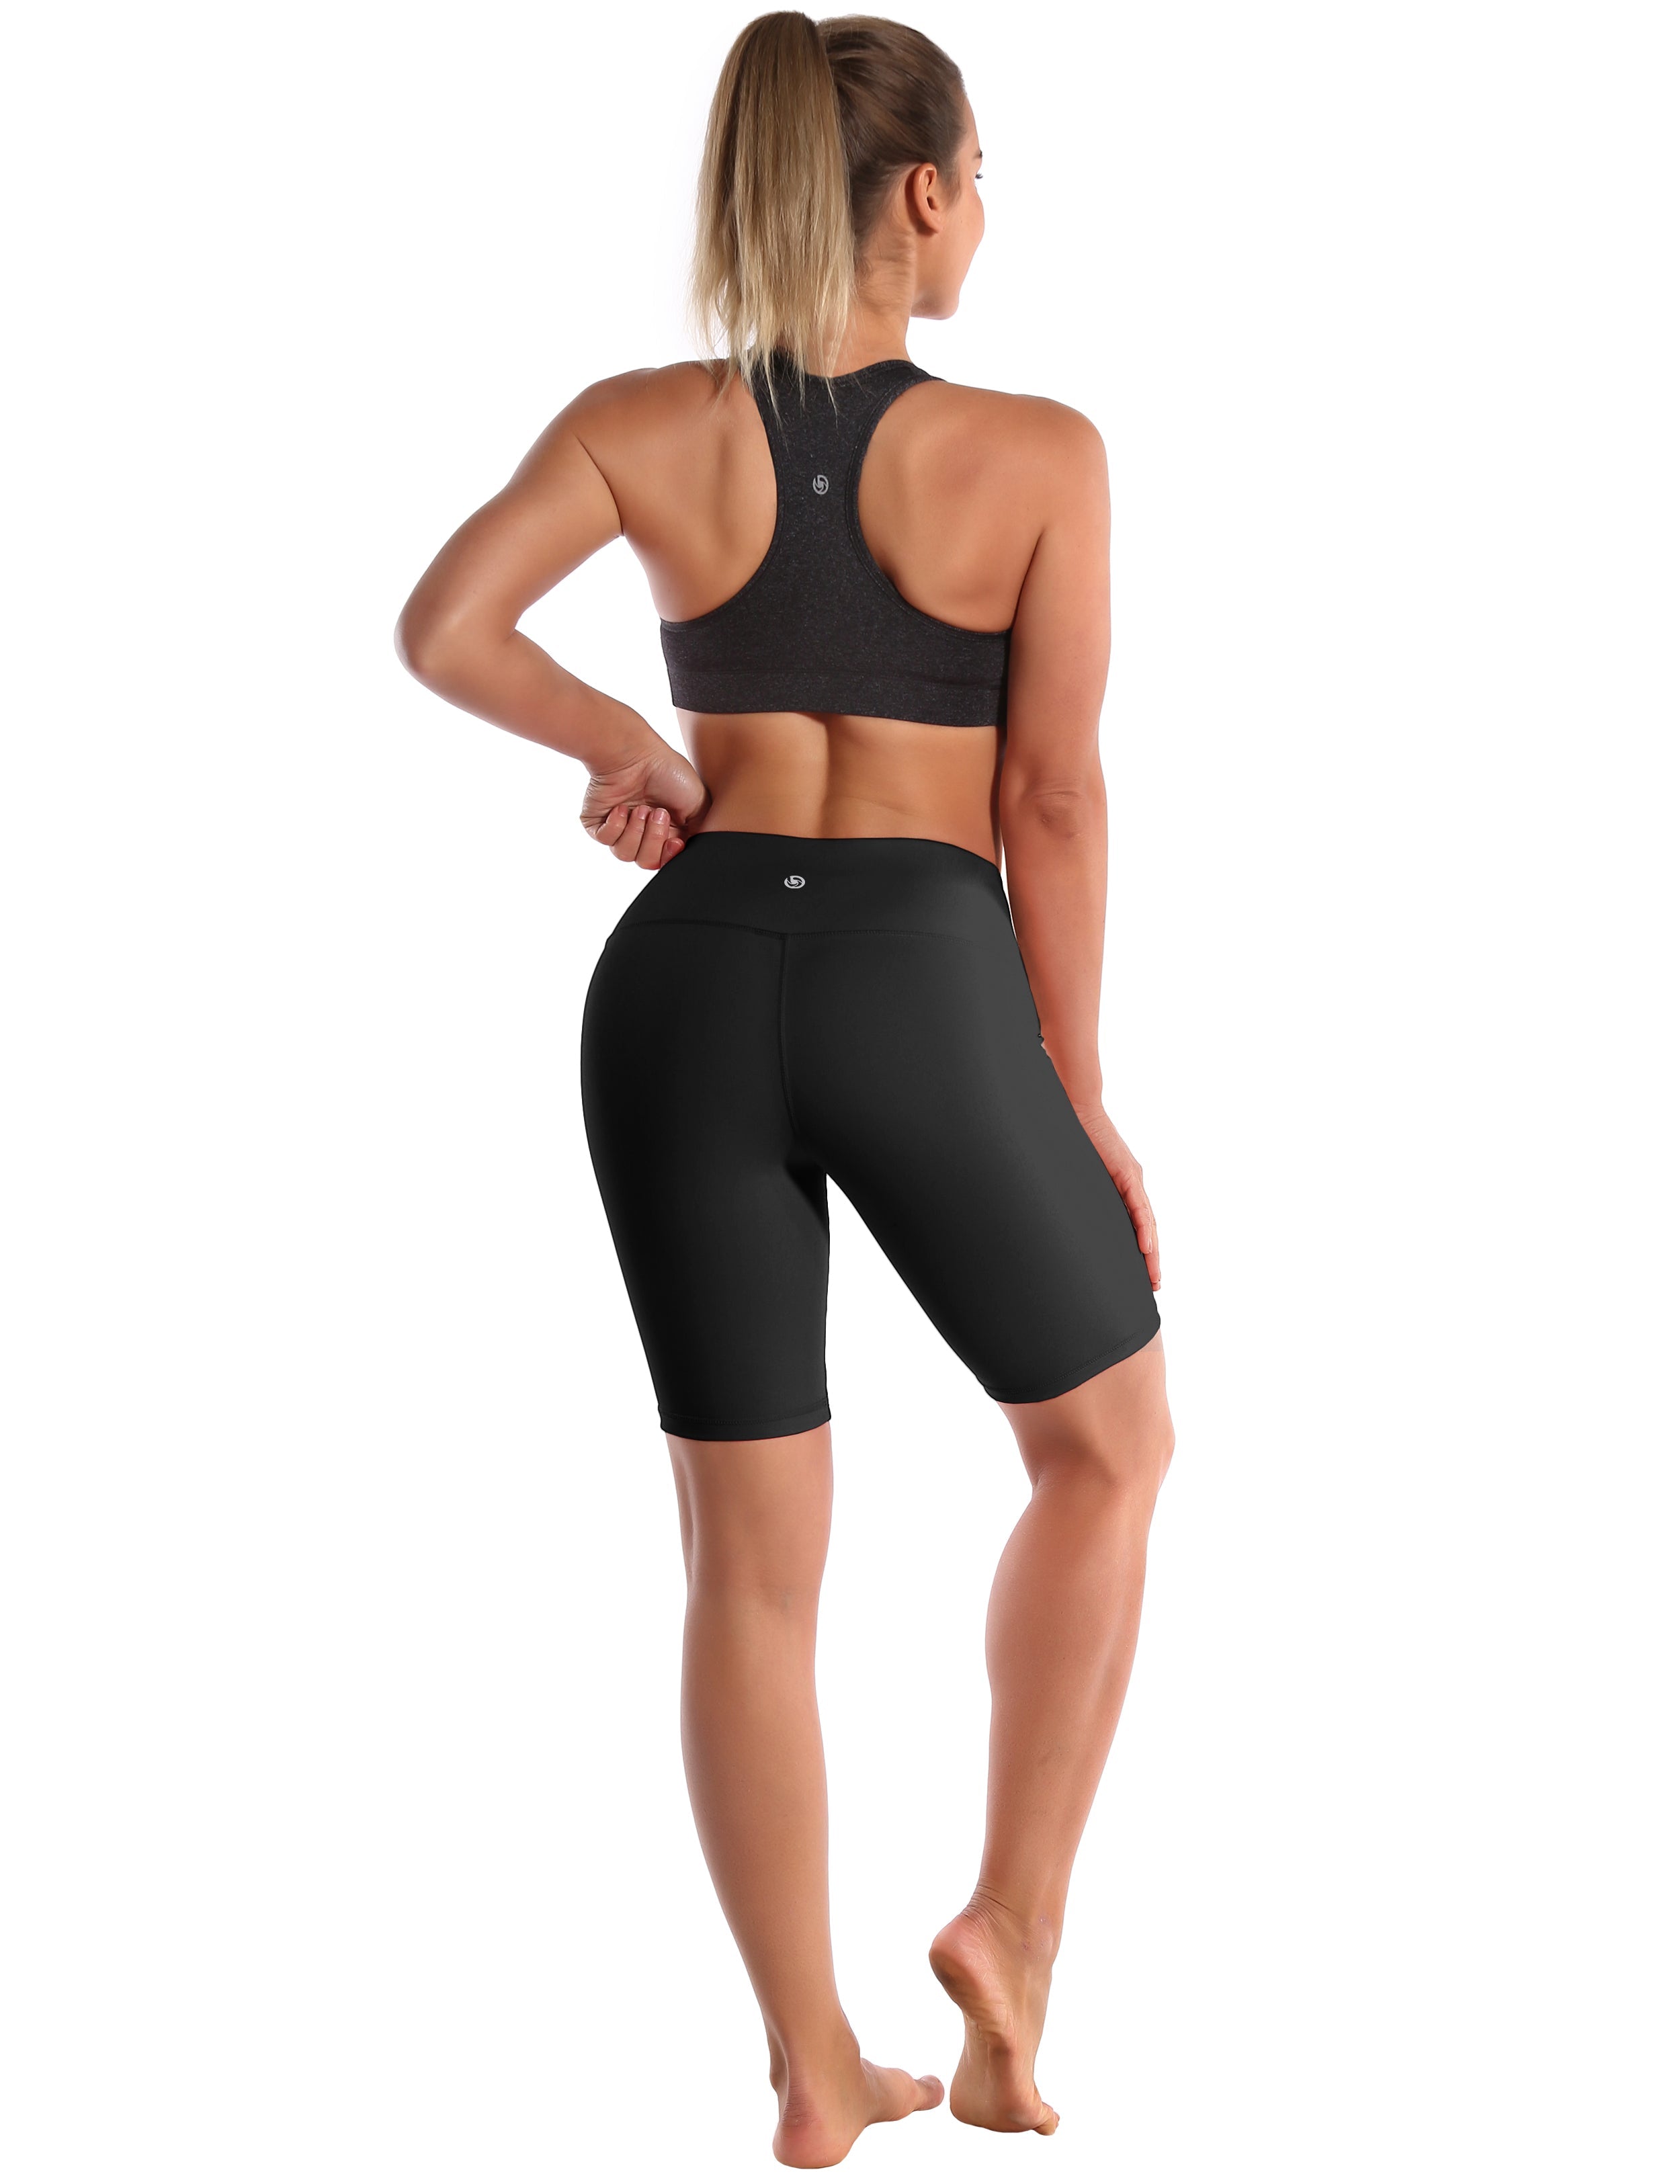 8" High Waist Pilates Shorts black Sleek, soft, smooth and totally comfortable: our newest style is here. Softest-ever fabric High elasticity High density 4-way stretch Fabric doesn't attract lint easily No see-through Moisture-wicking Machine wash 75% Nylon, 25% Spandex